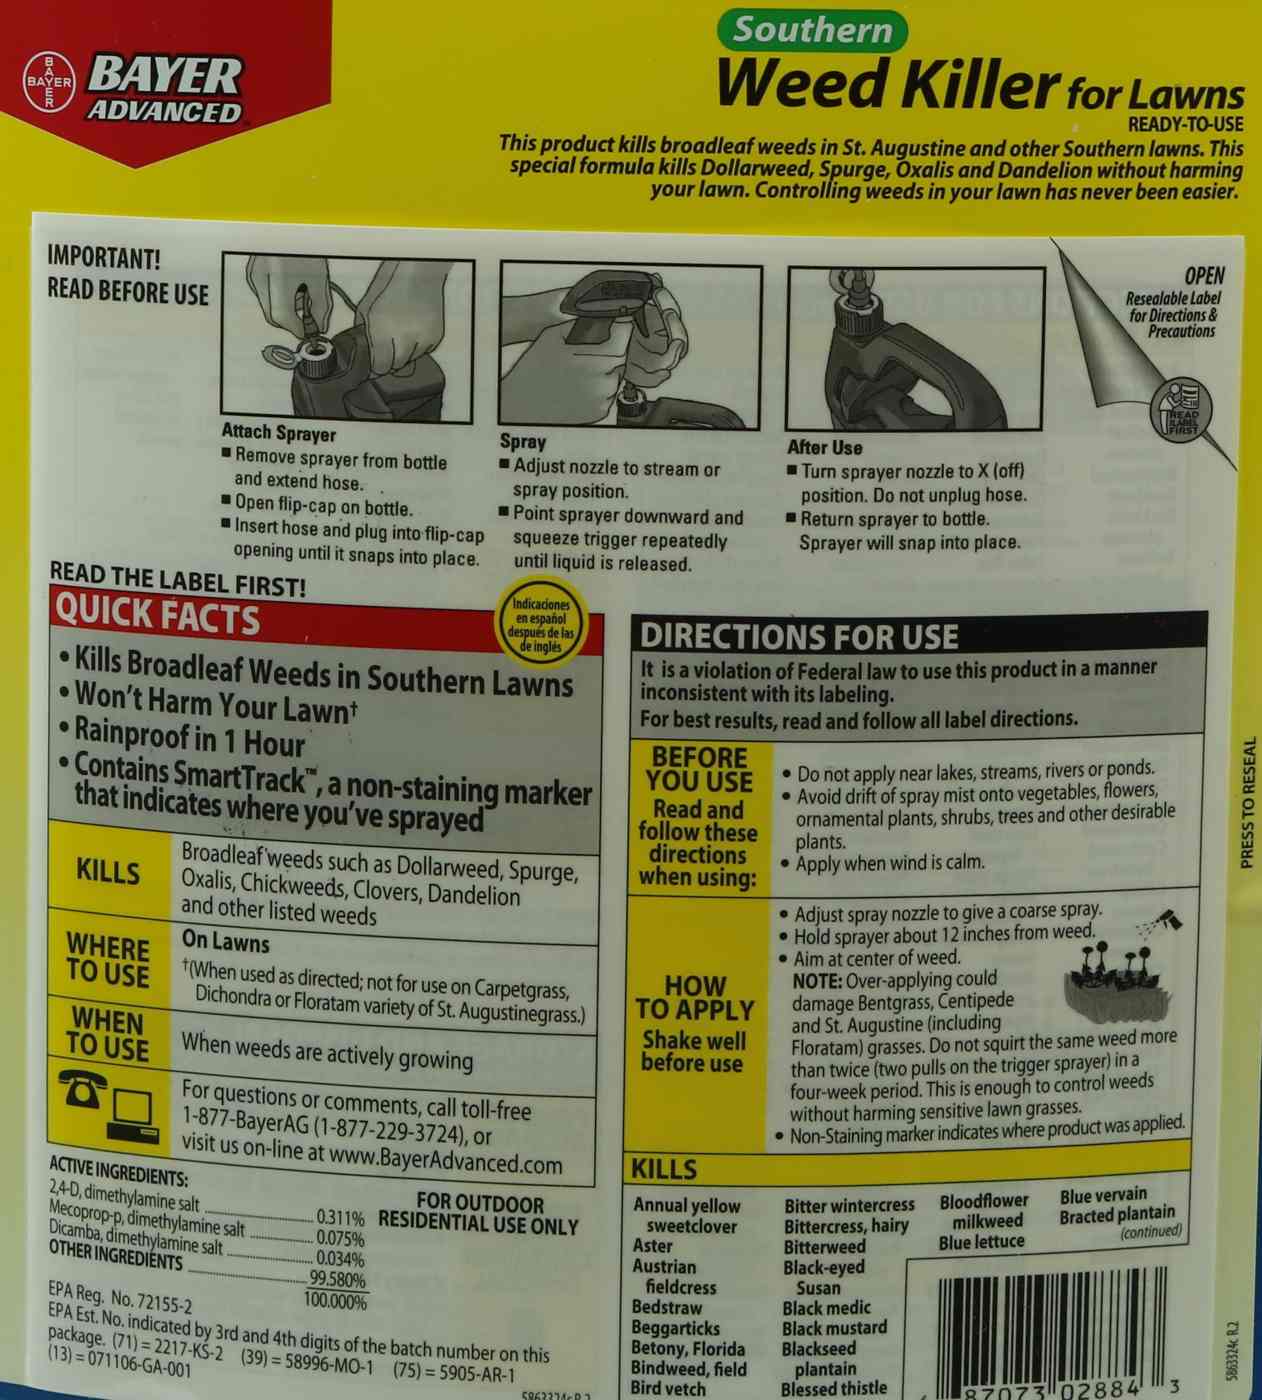 Bayer Southern Weed Killer For Lawns; image 2 of 2